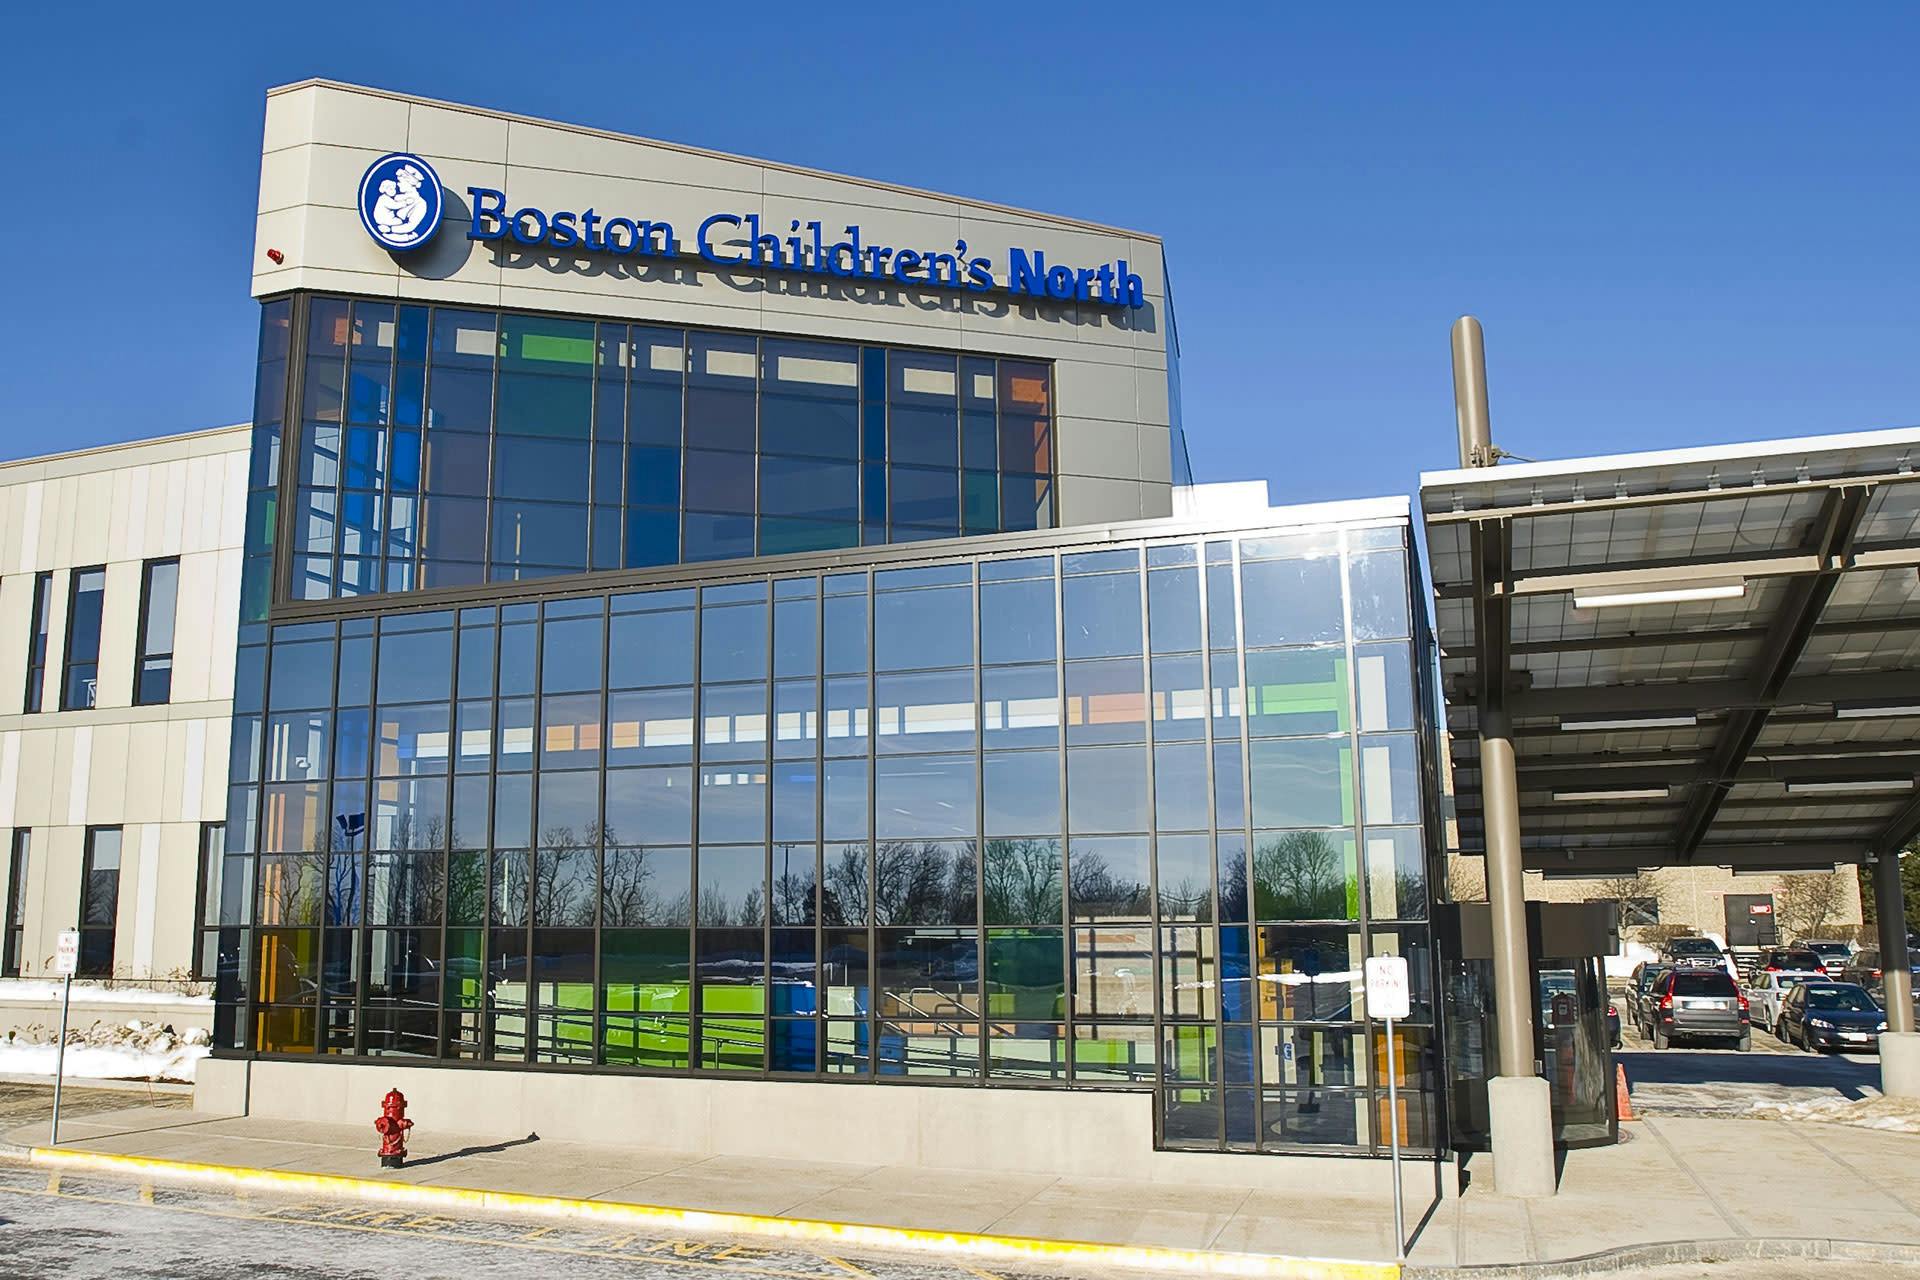 Low angle view of Boston's Children North Hospital